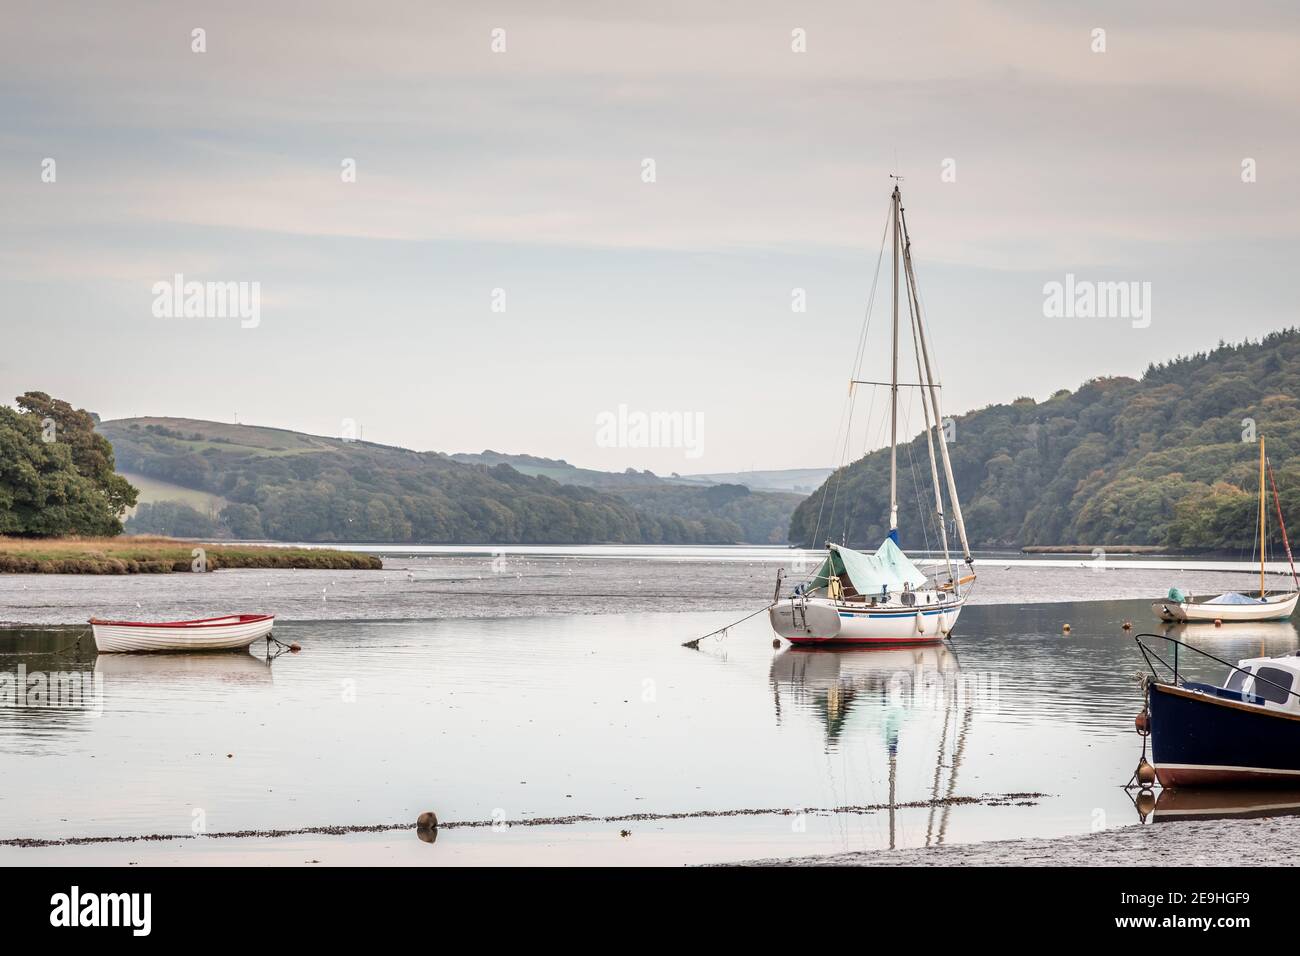 Boats on the St Germans River, Cornwall Stock Photo